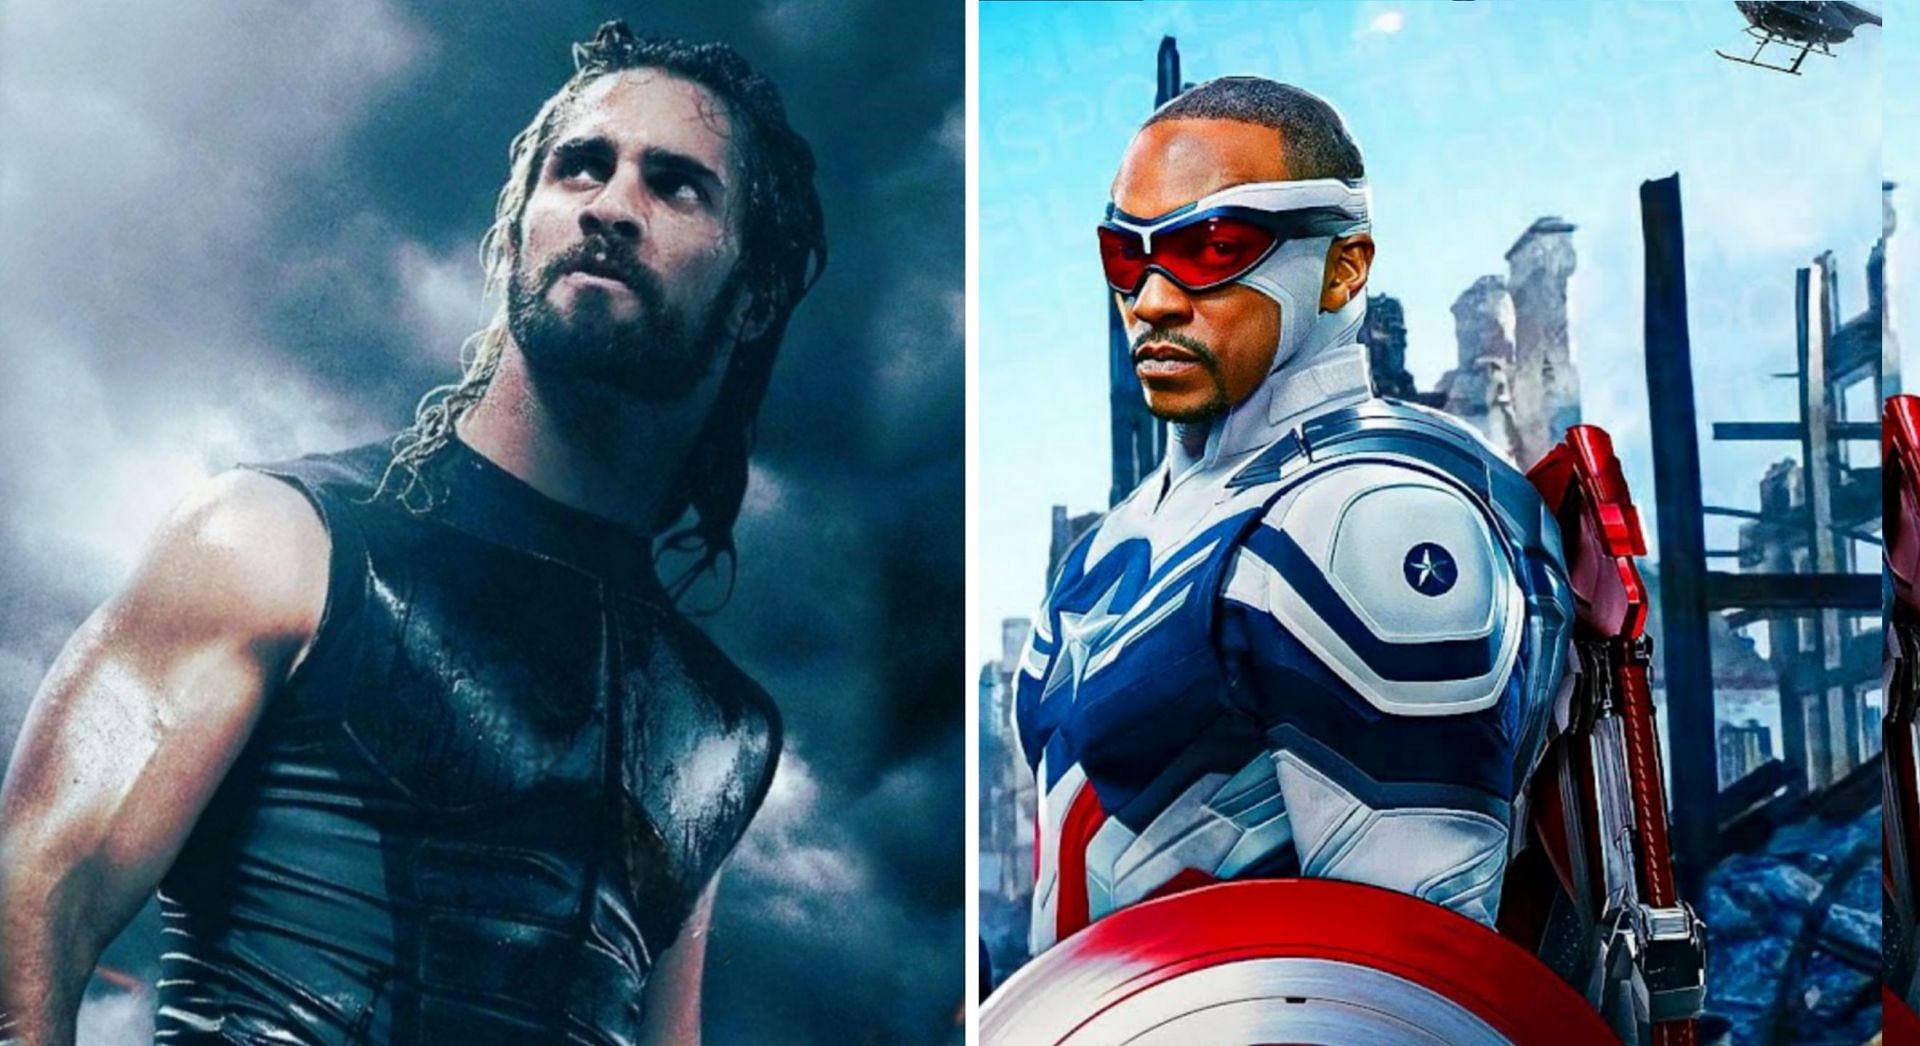 The world&rsquo;s top wrestler and WWE World Heavyweight Champion, Colby Daniel Lopez, also known as Seth Rollins, will join the MCU in the fourth Captain America movie, Captain America: Brave New World. (Image via Sportskeeda)